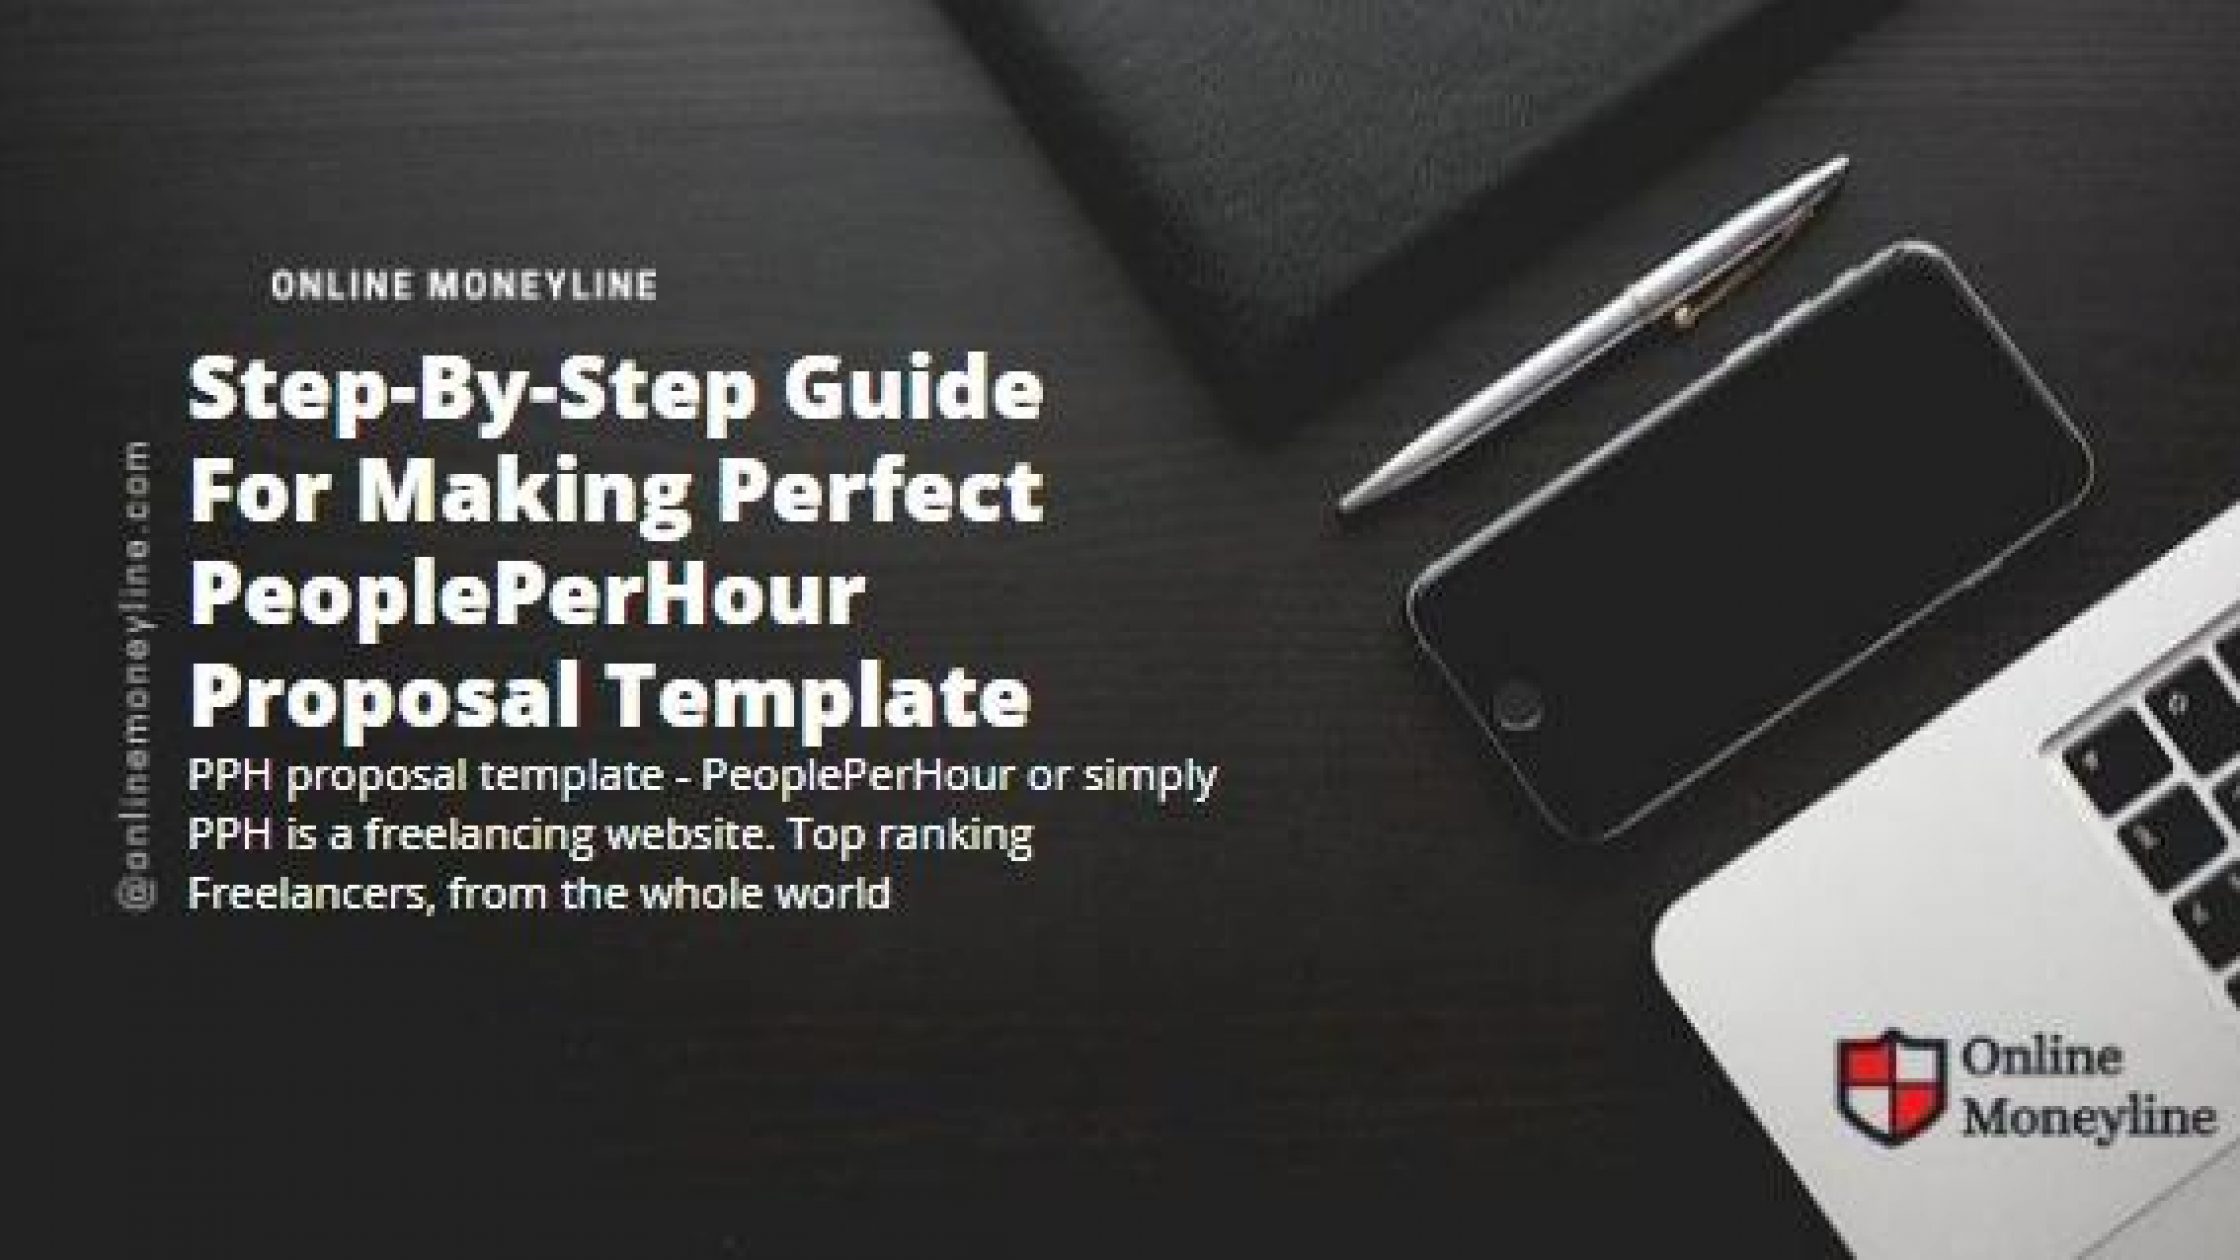 Step-By-Step Guide For Making Perfect PeoplePerHour Proposal Template